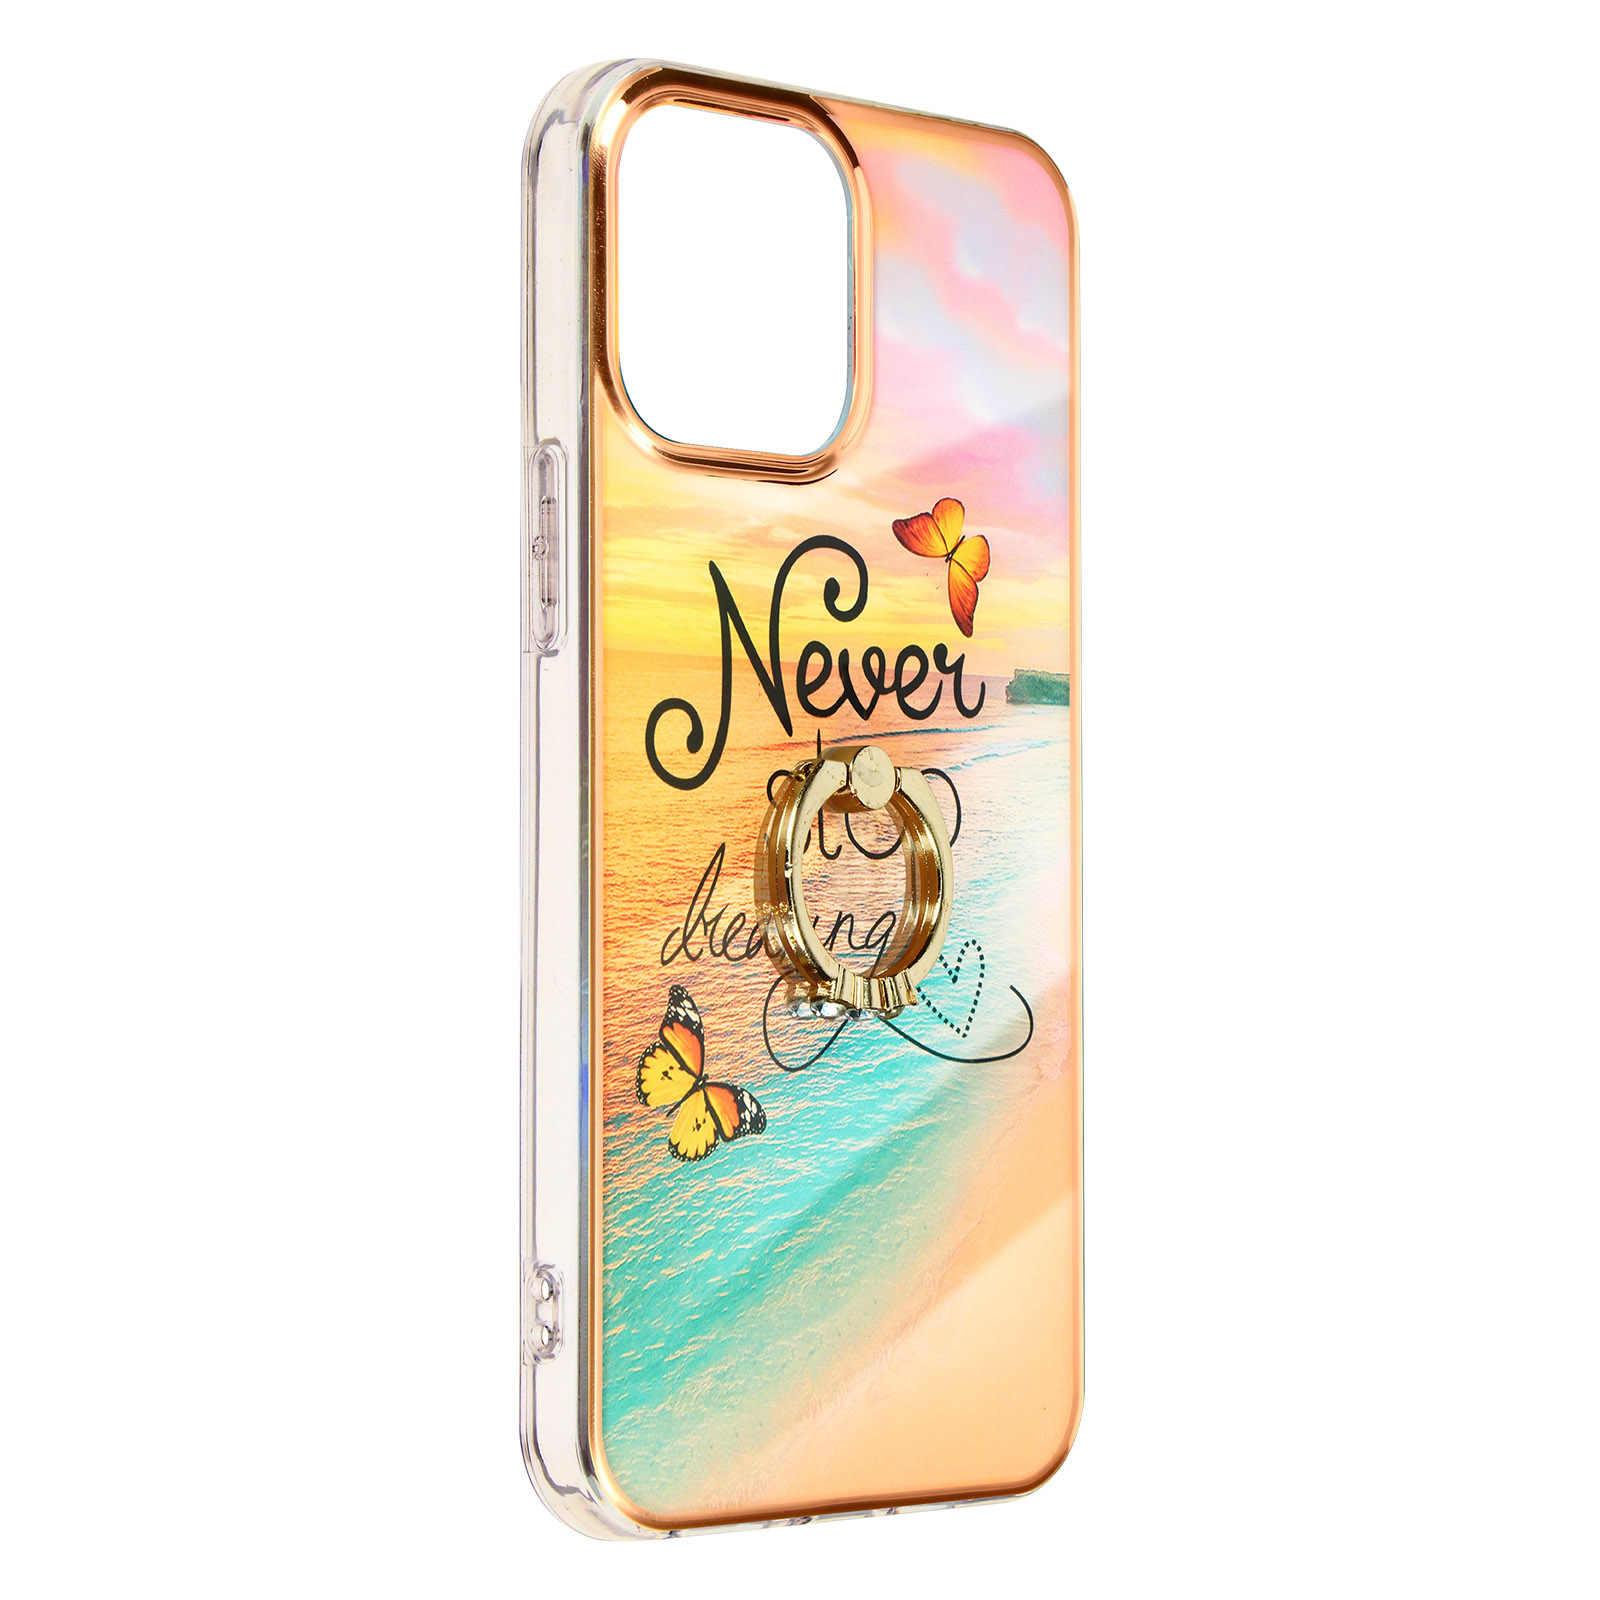 Orange Pro Stop Backcover, Dreaming Max, Series, AVIZAR Apple, iPhone Never 13